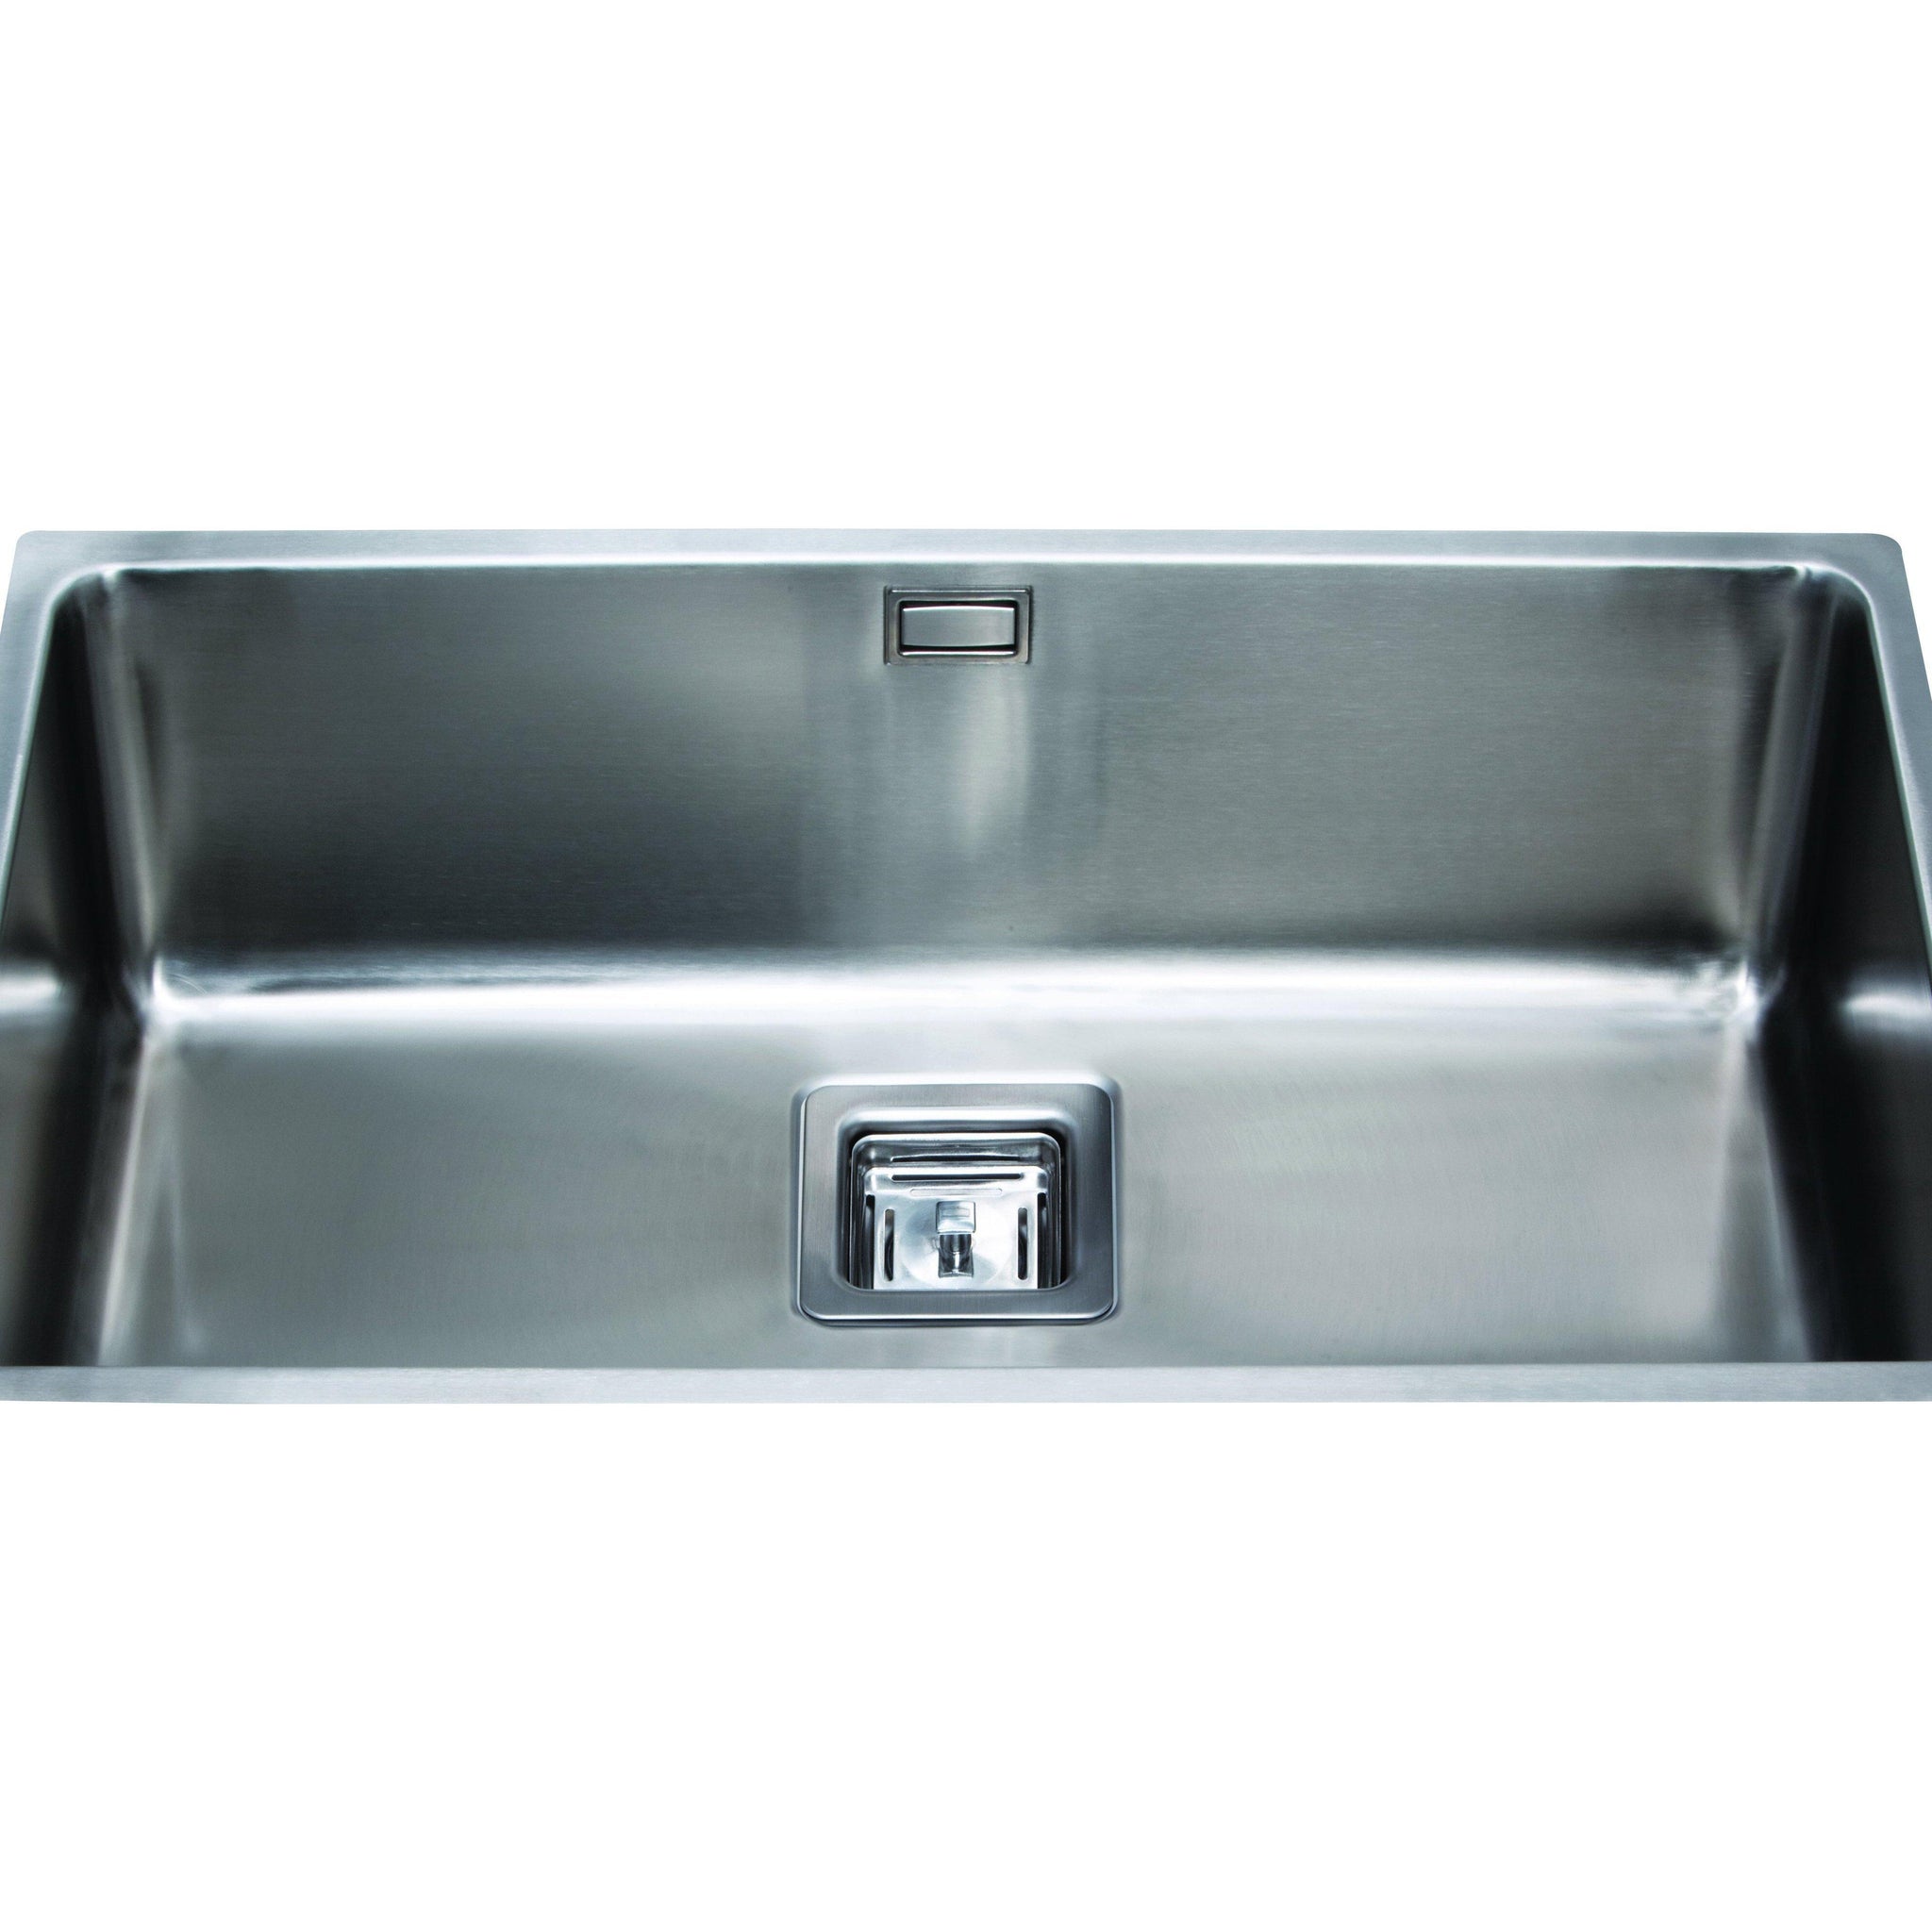 Cda Ksc25ss Undermount Square Single Bowl Sink Stainless Steel